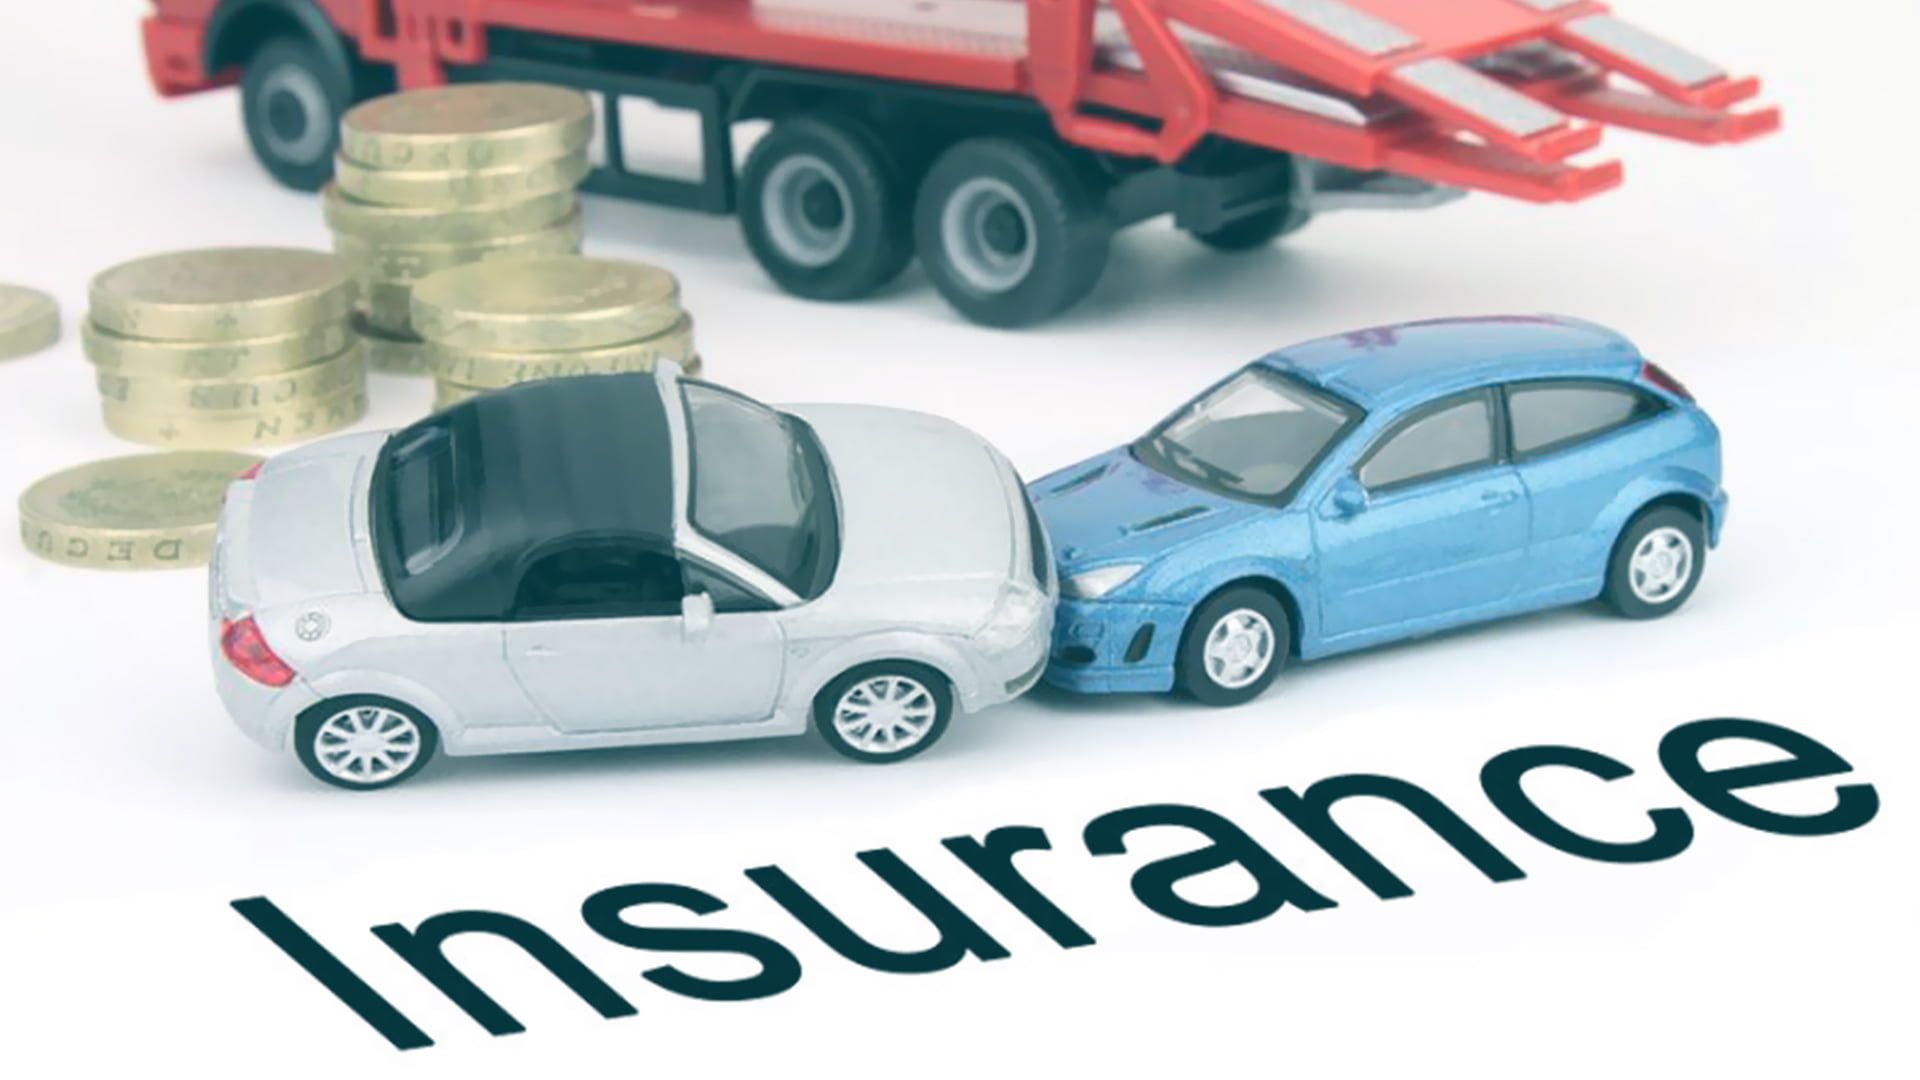 Different types of motor insurance